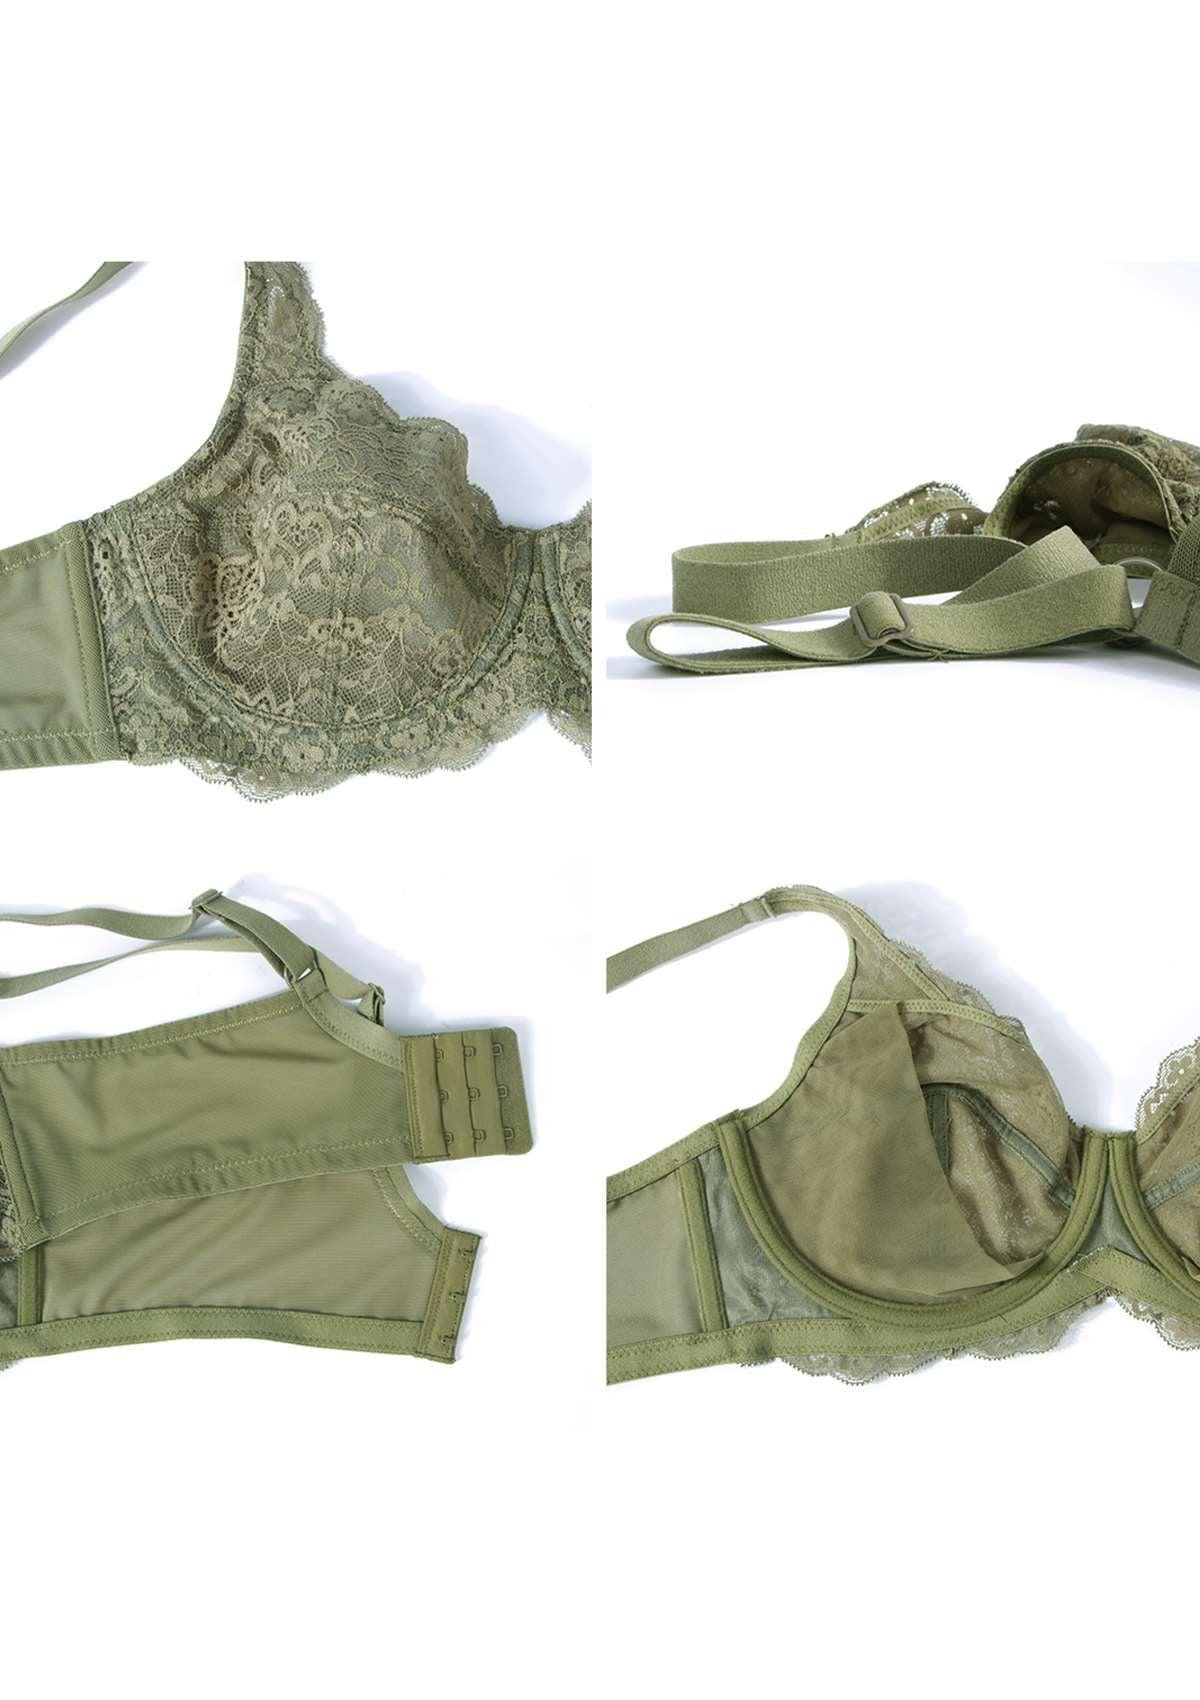 HSIA All-Over Floral Lace Unlined Bra: Minimizer Bra For Heavy Breasts - Dark Green / 38 / D